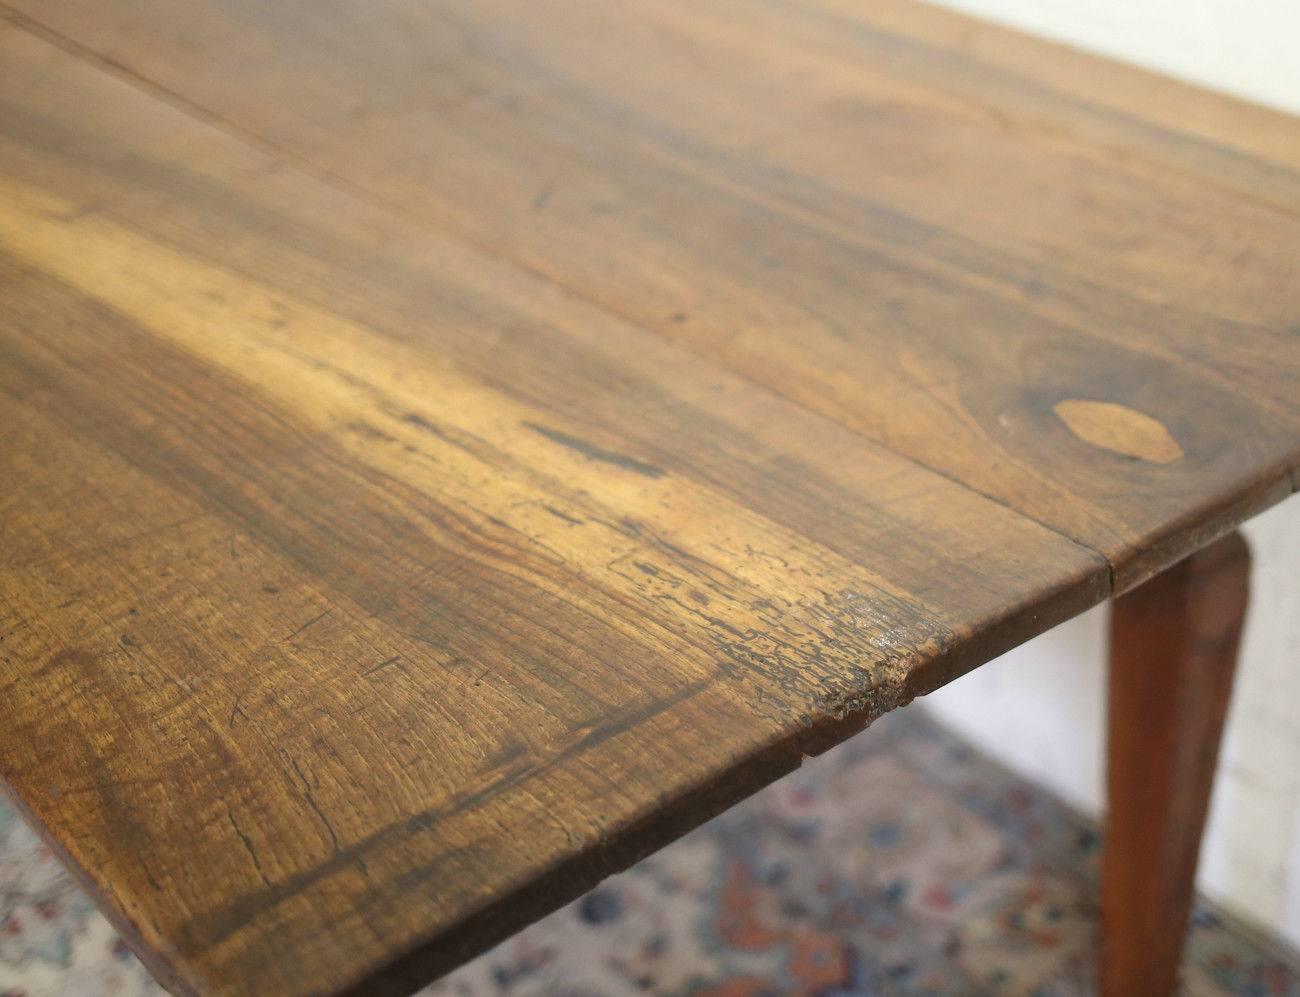 17th-18th Century Italian Long Rustic Dining Table with Three Drawers For Sale 5